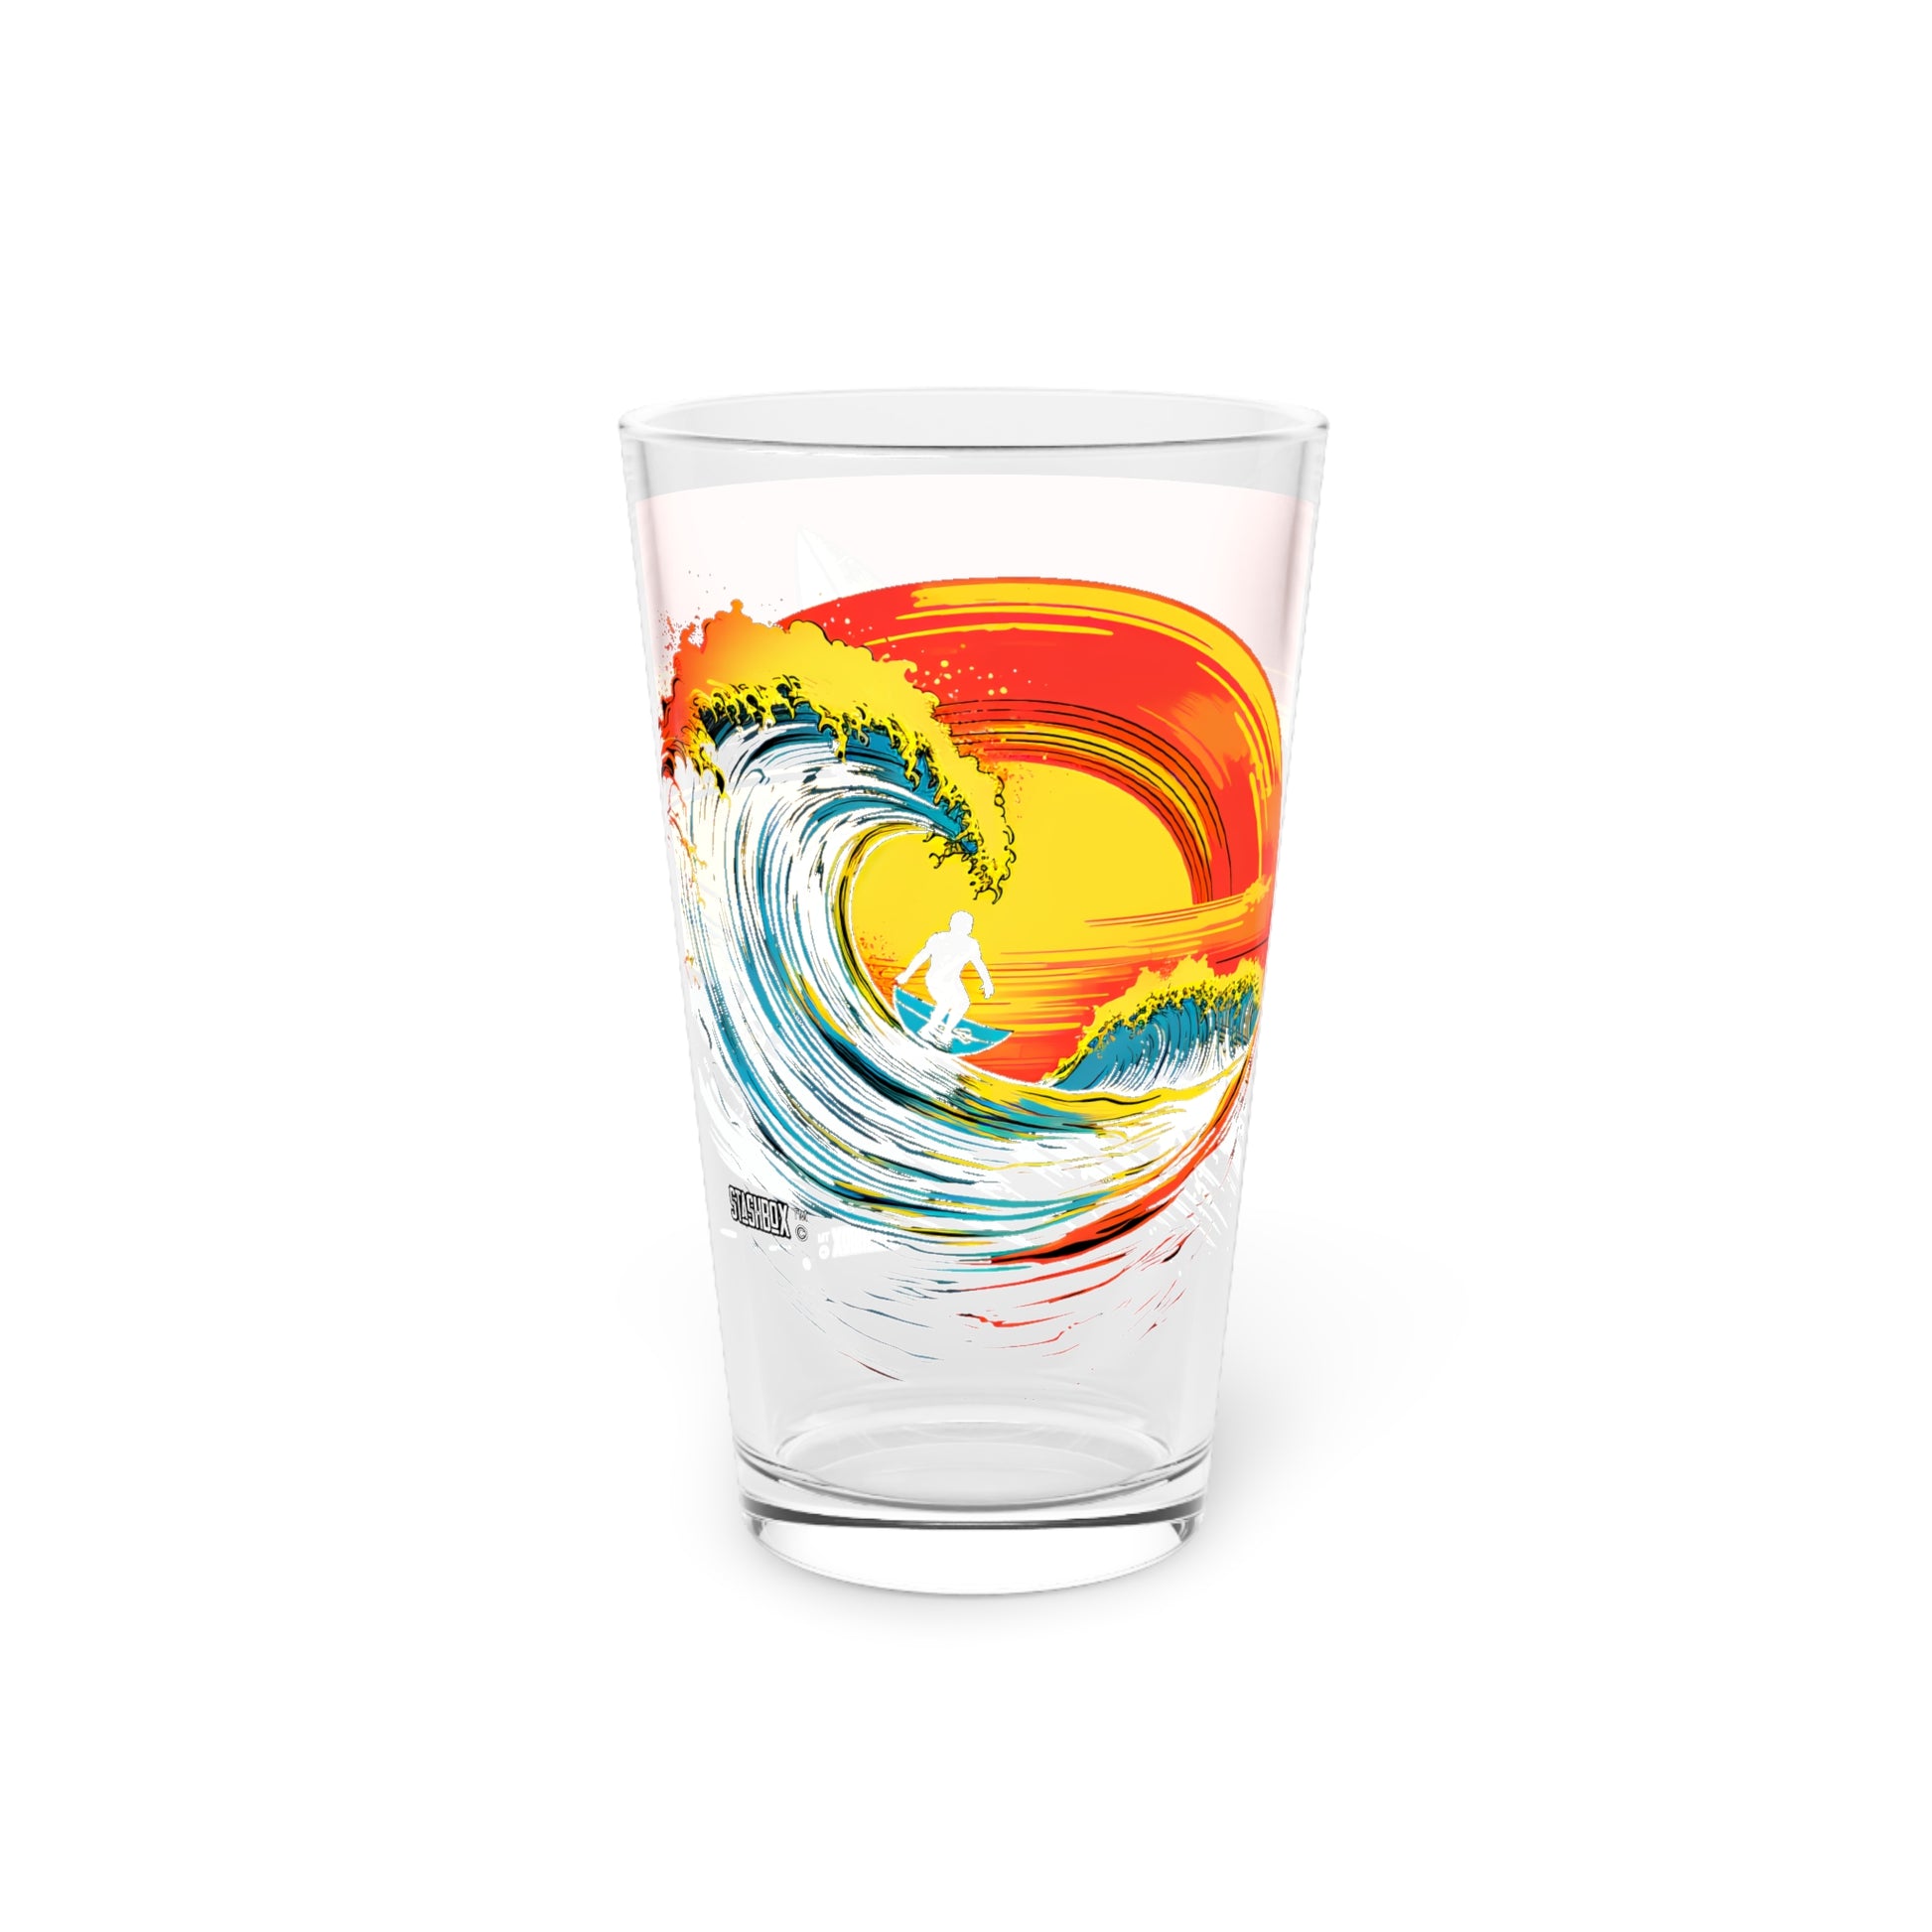 Dive into retro waves with our Classic Surfing Design Pint Glass, 16oz. 2 Designs in 1 - Waves Design #66. Surfing nostalgia meets elegance, exclusively at Stashbox.ai.